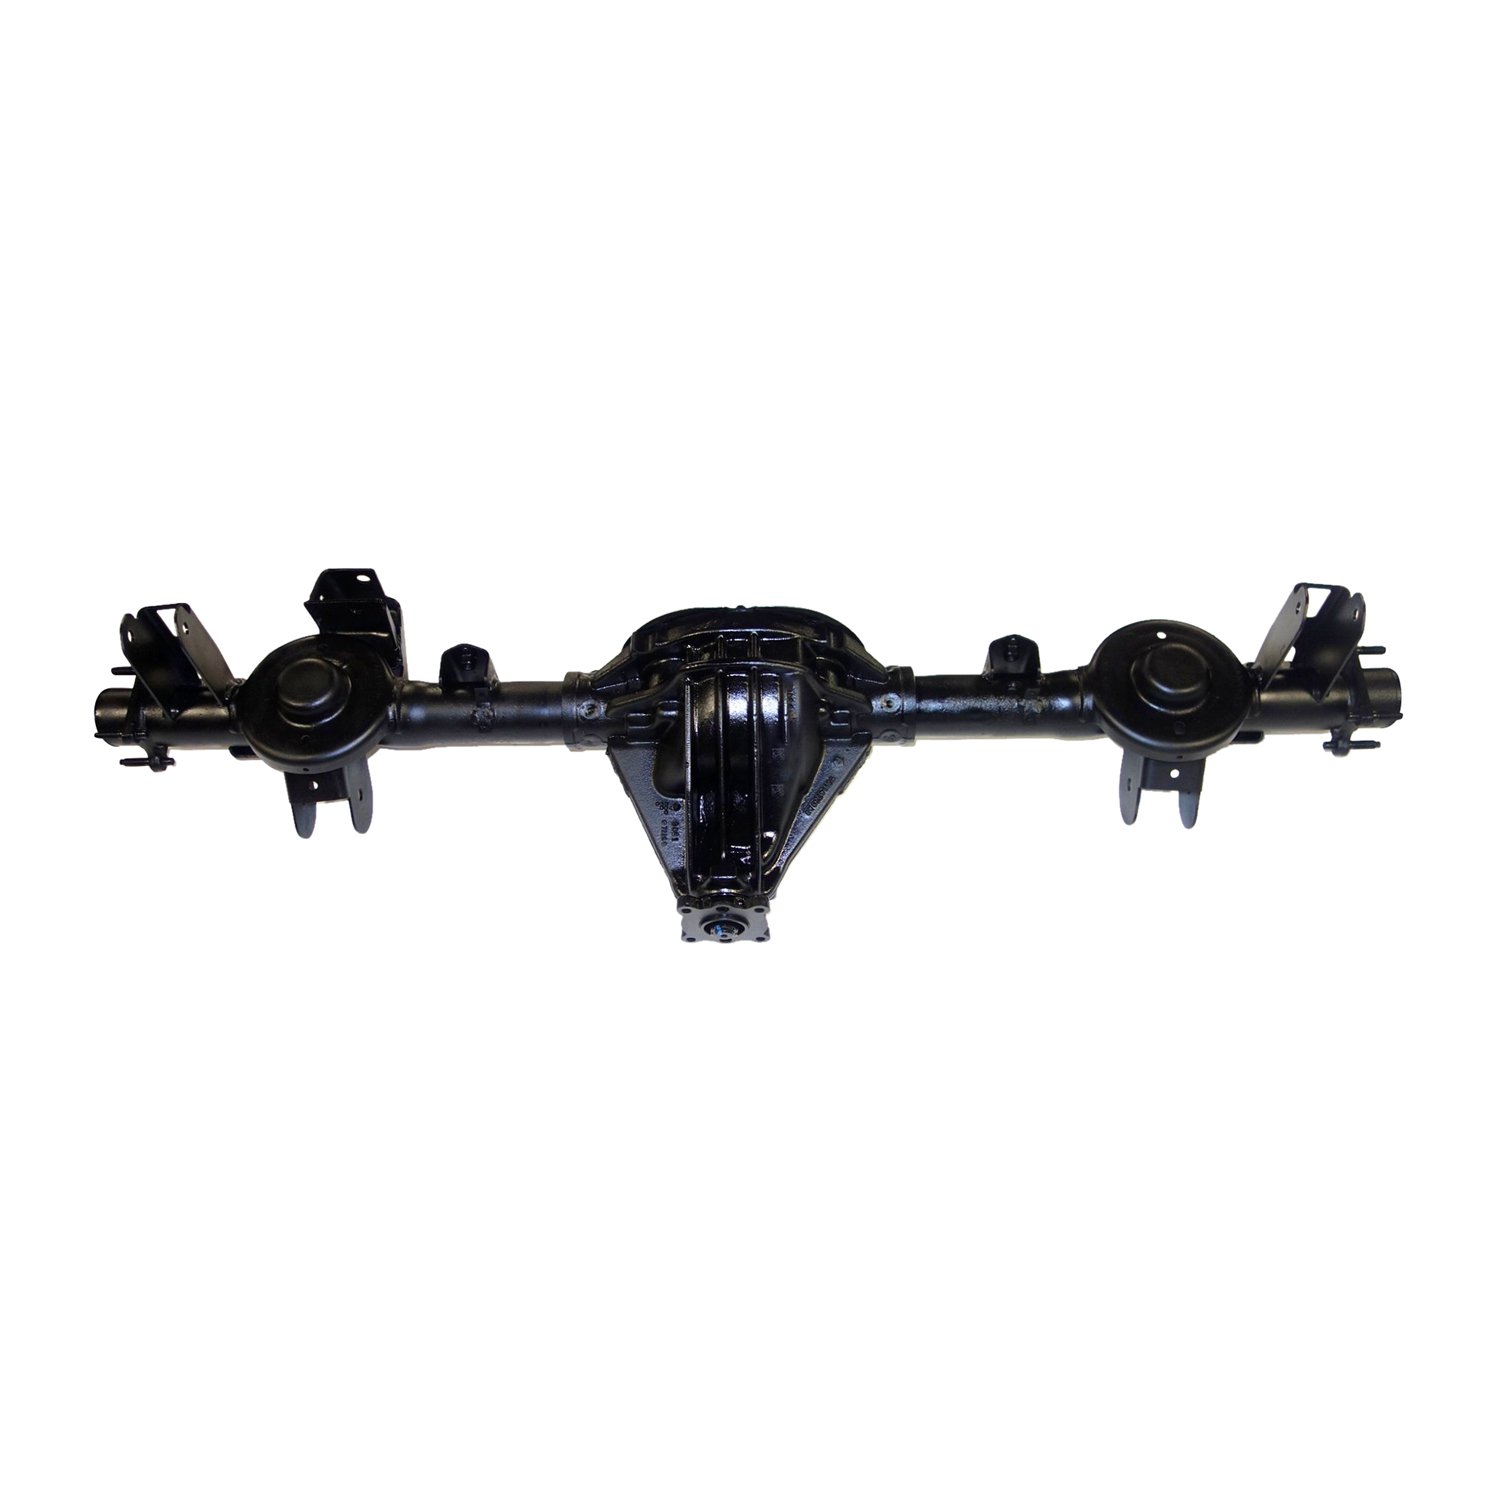 Remanufactured Axle Assy for Chy 8.25" 2005 Liberty 3.73 , 2.8l & 3.7l w/ ABS, Posi LSD